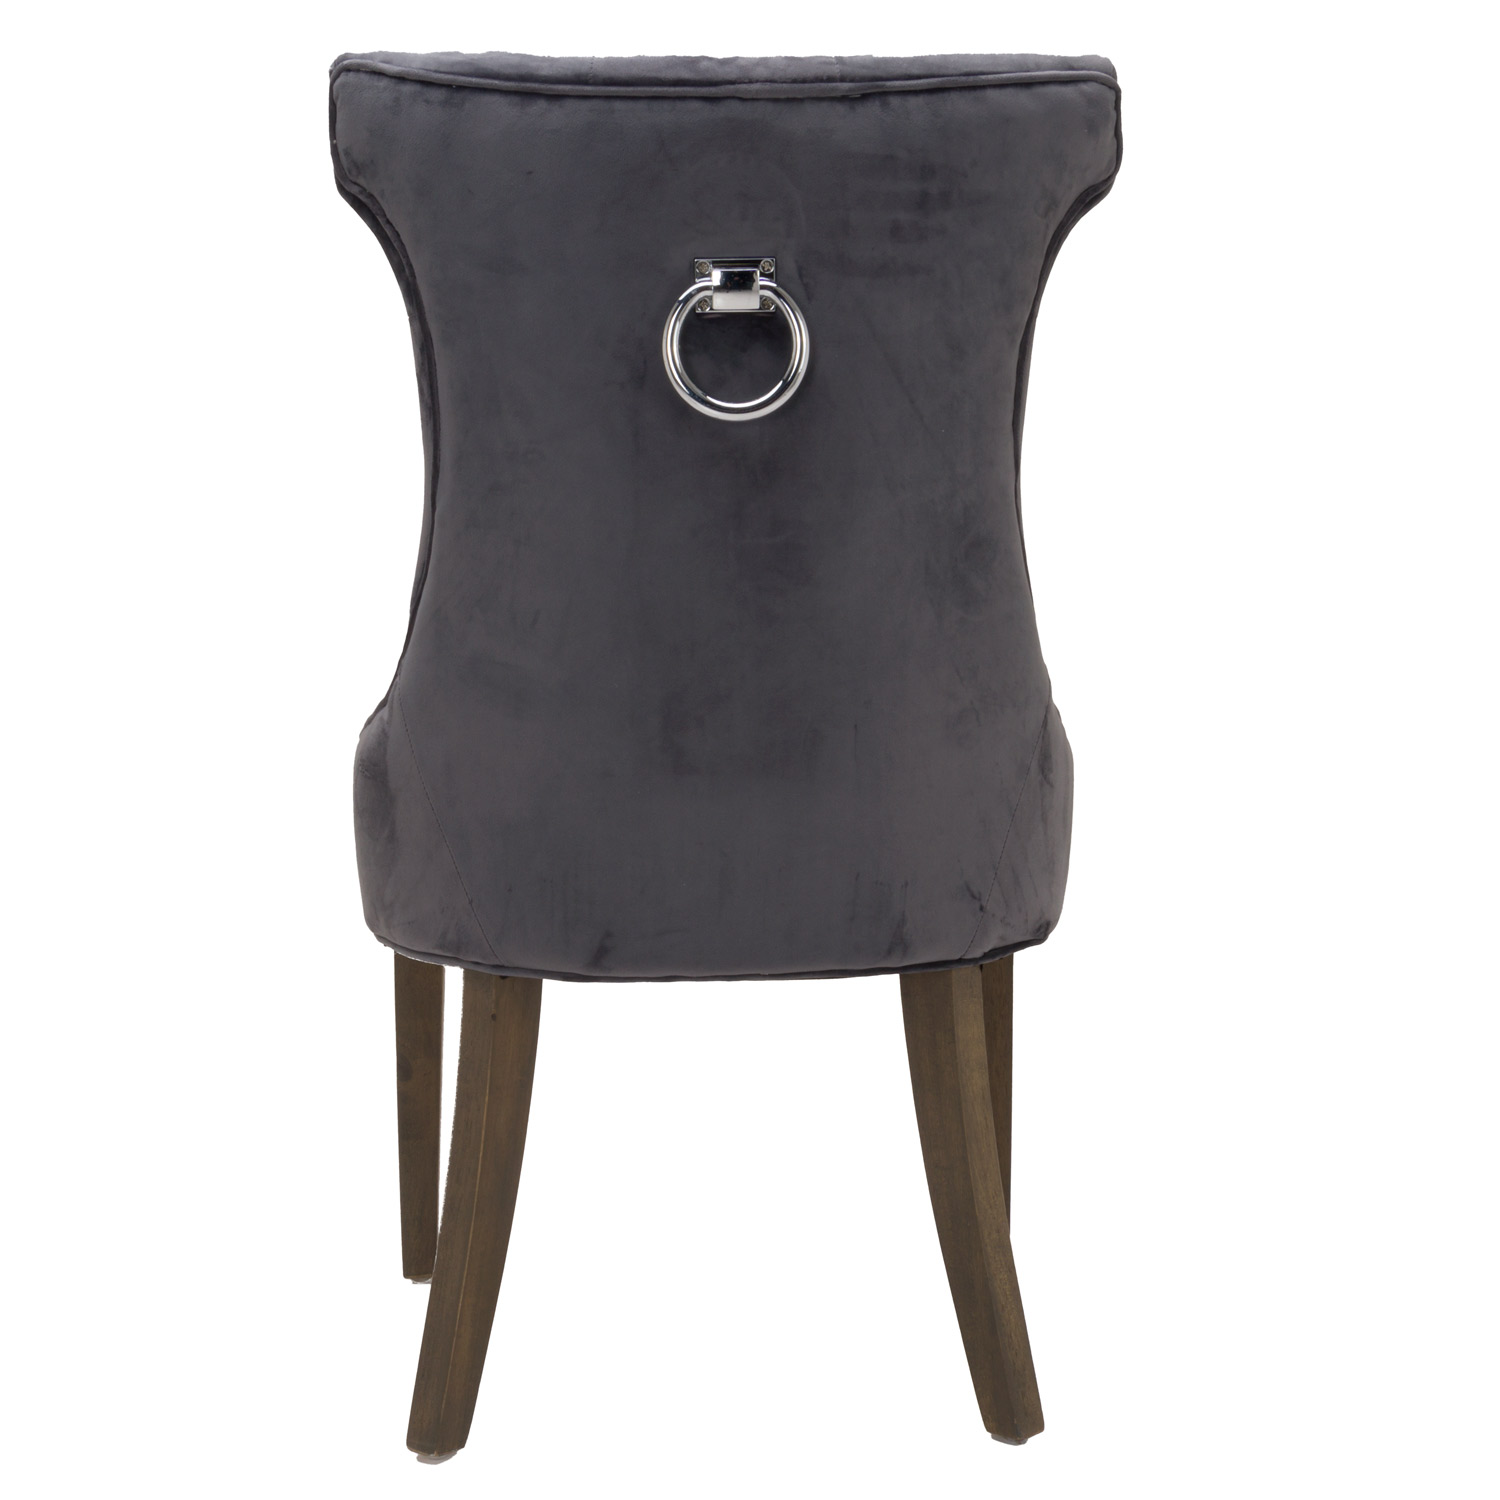 Knightsbridge High Wing Ring Backed Dining Chair - Image 4